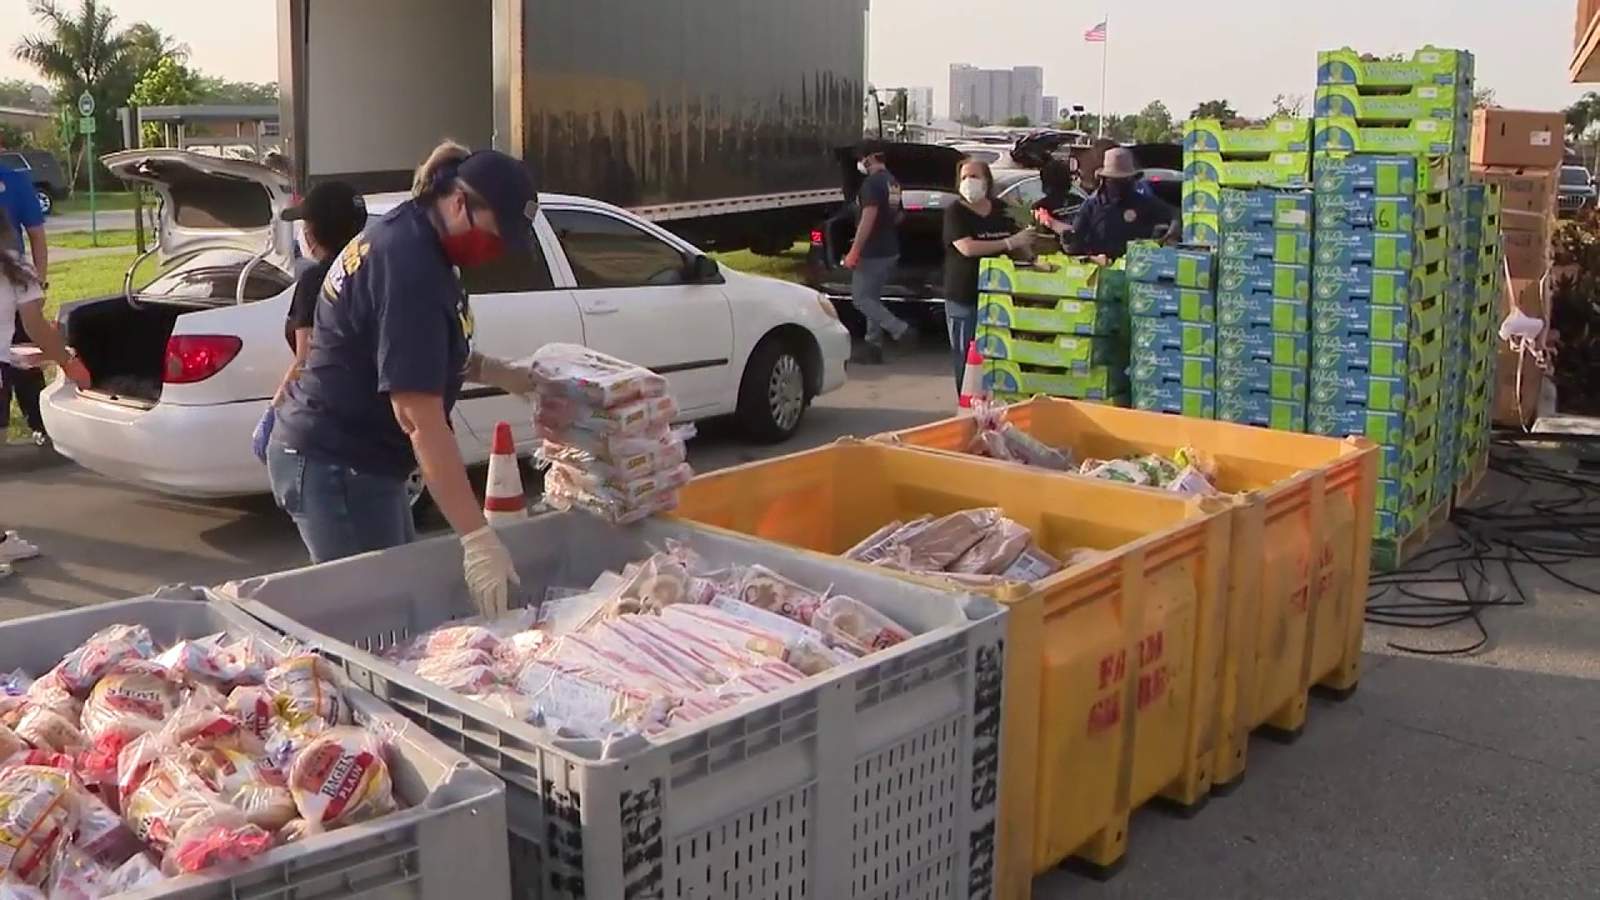 Hundreds of cars line up nearly 2 hours before food giveaway in Sweetwater